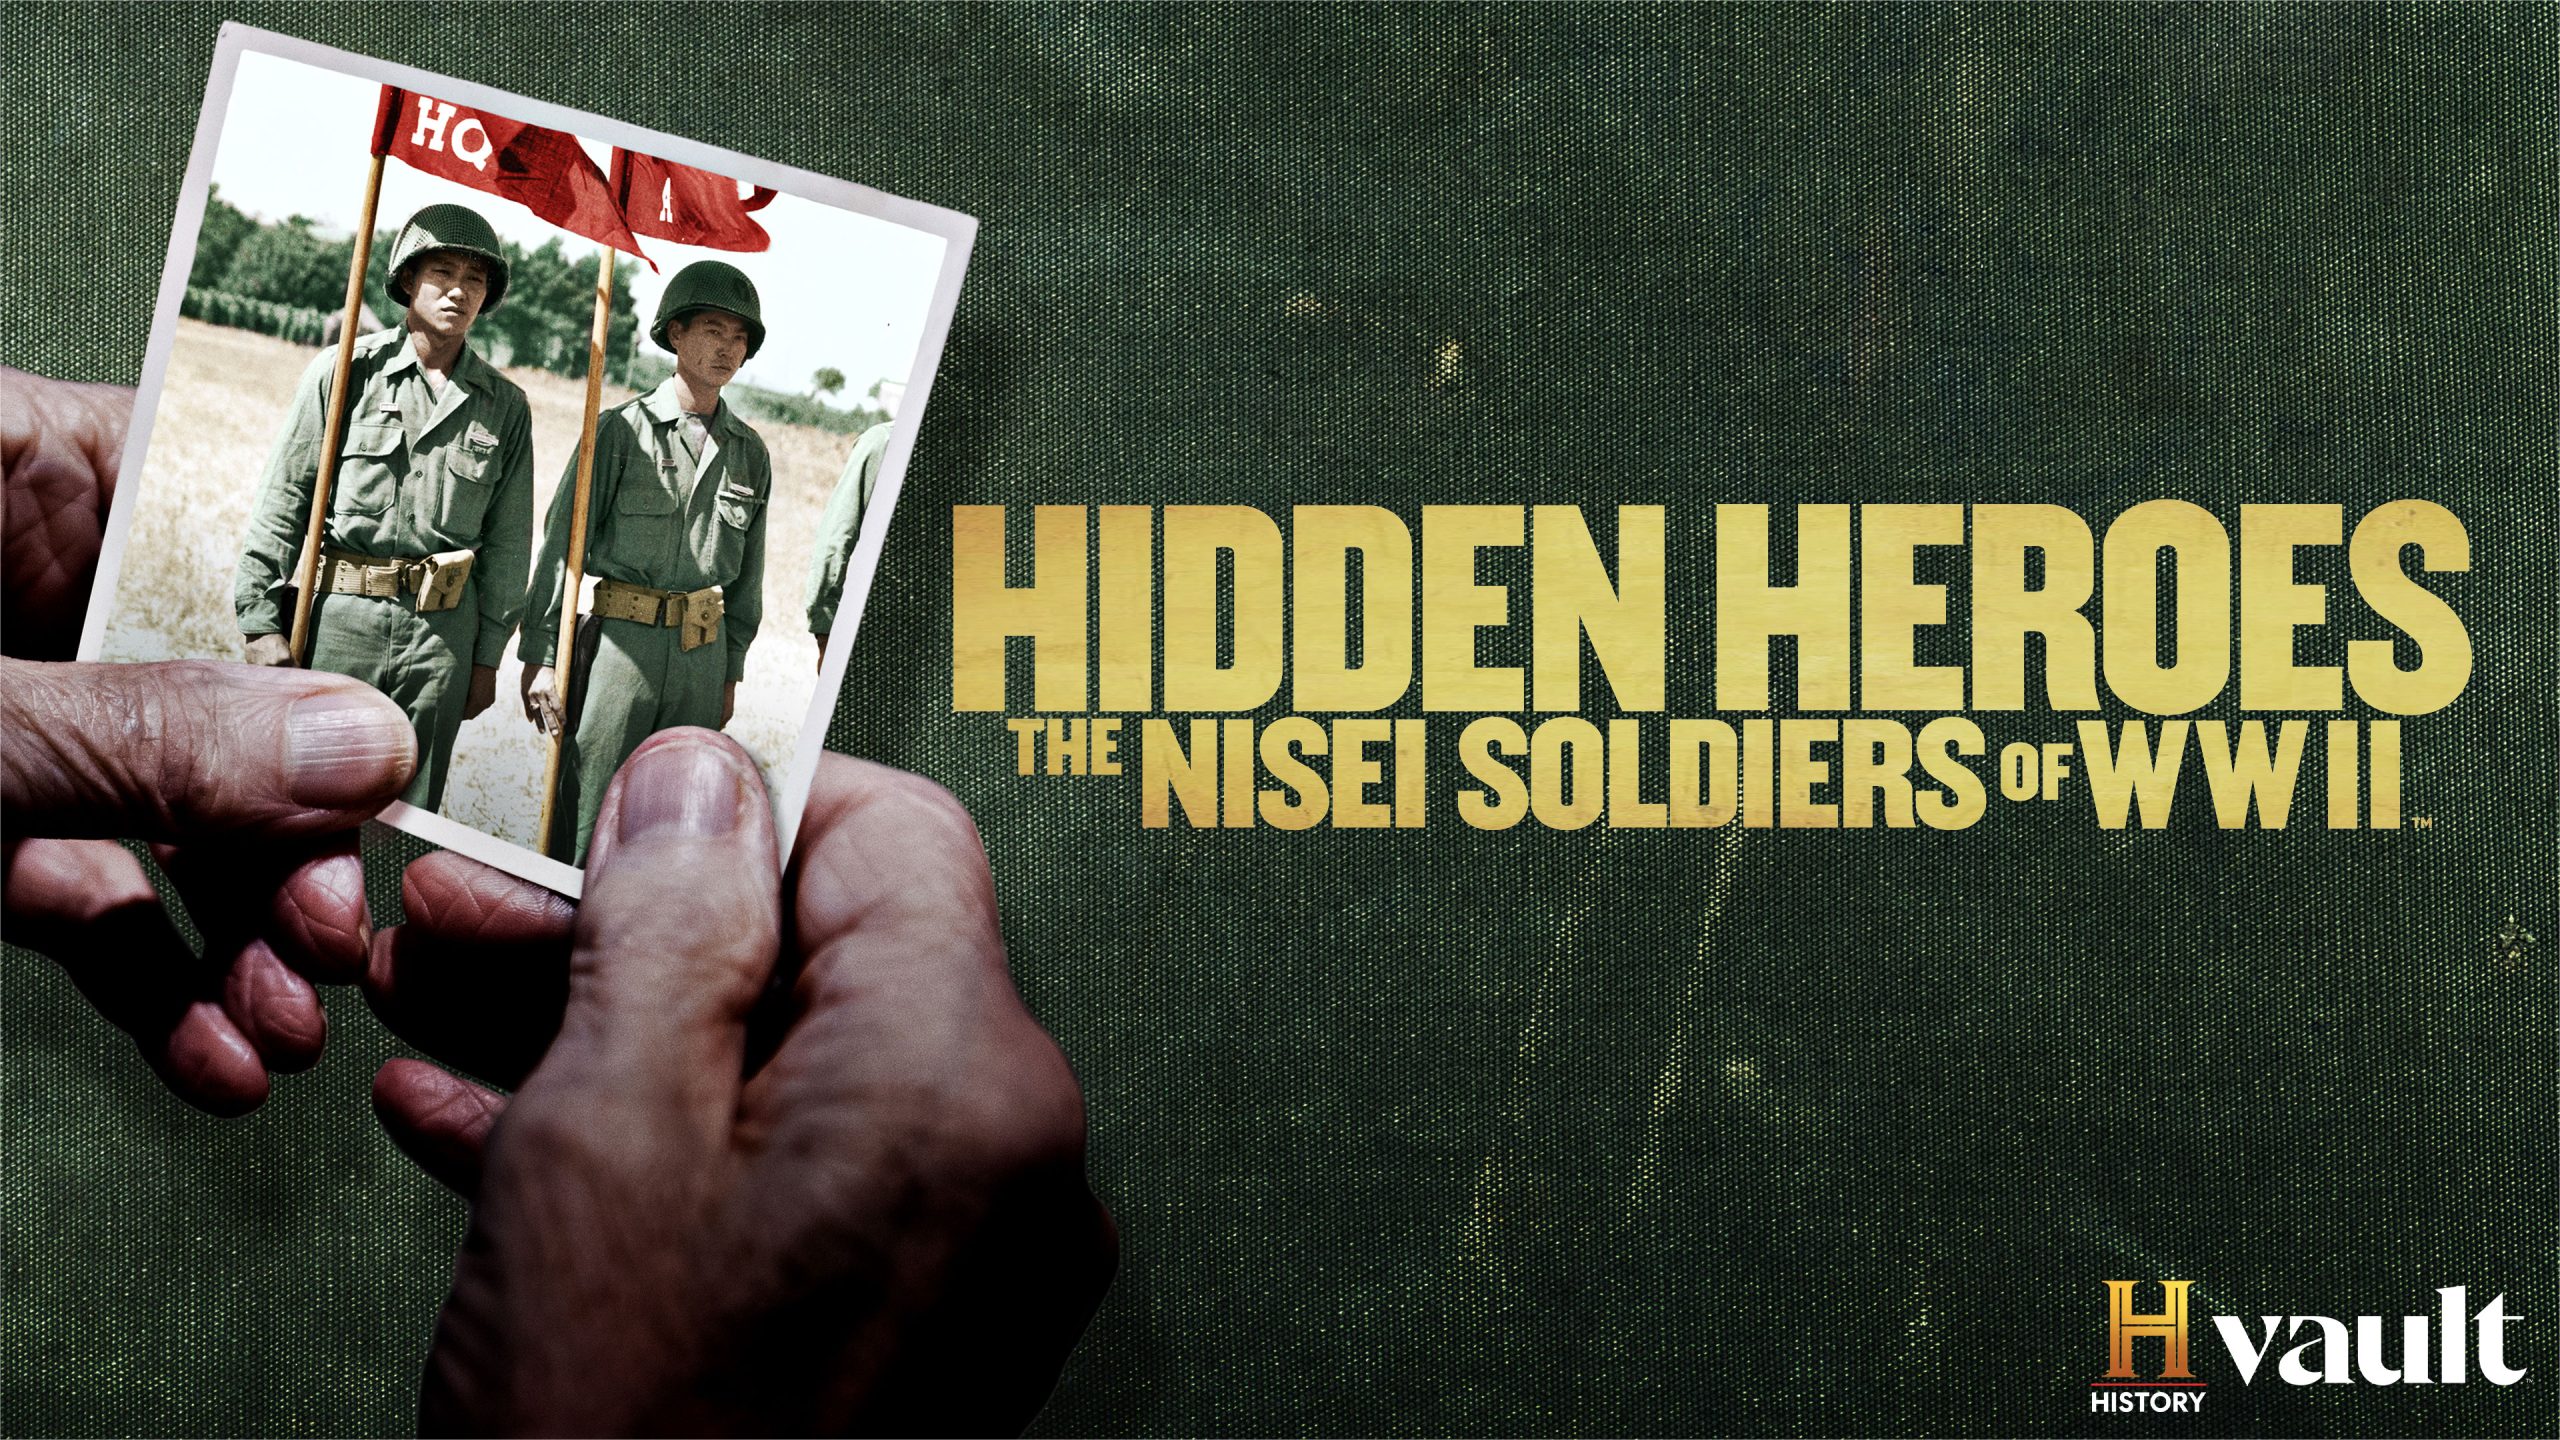 Watch Hidden Heroes: The Nisei Soldiers of WWII on HISTORY Vault